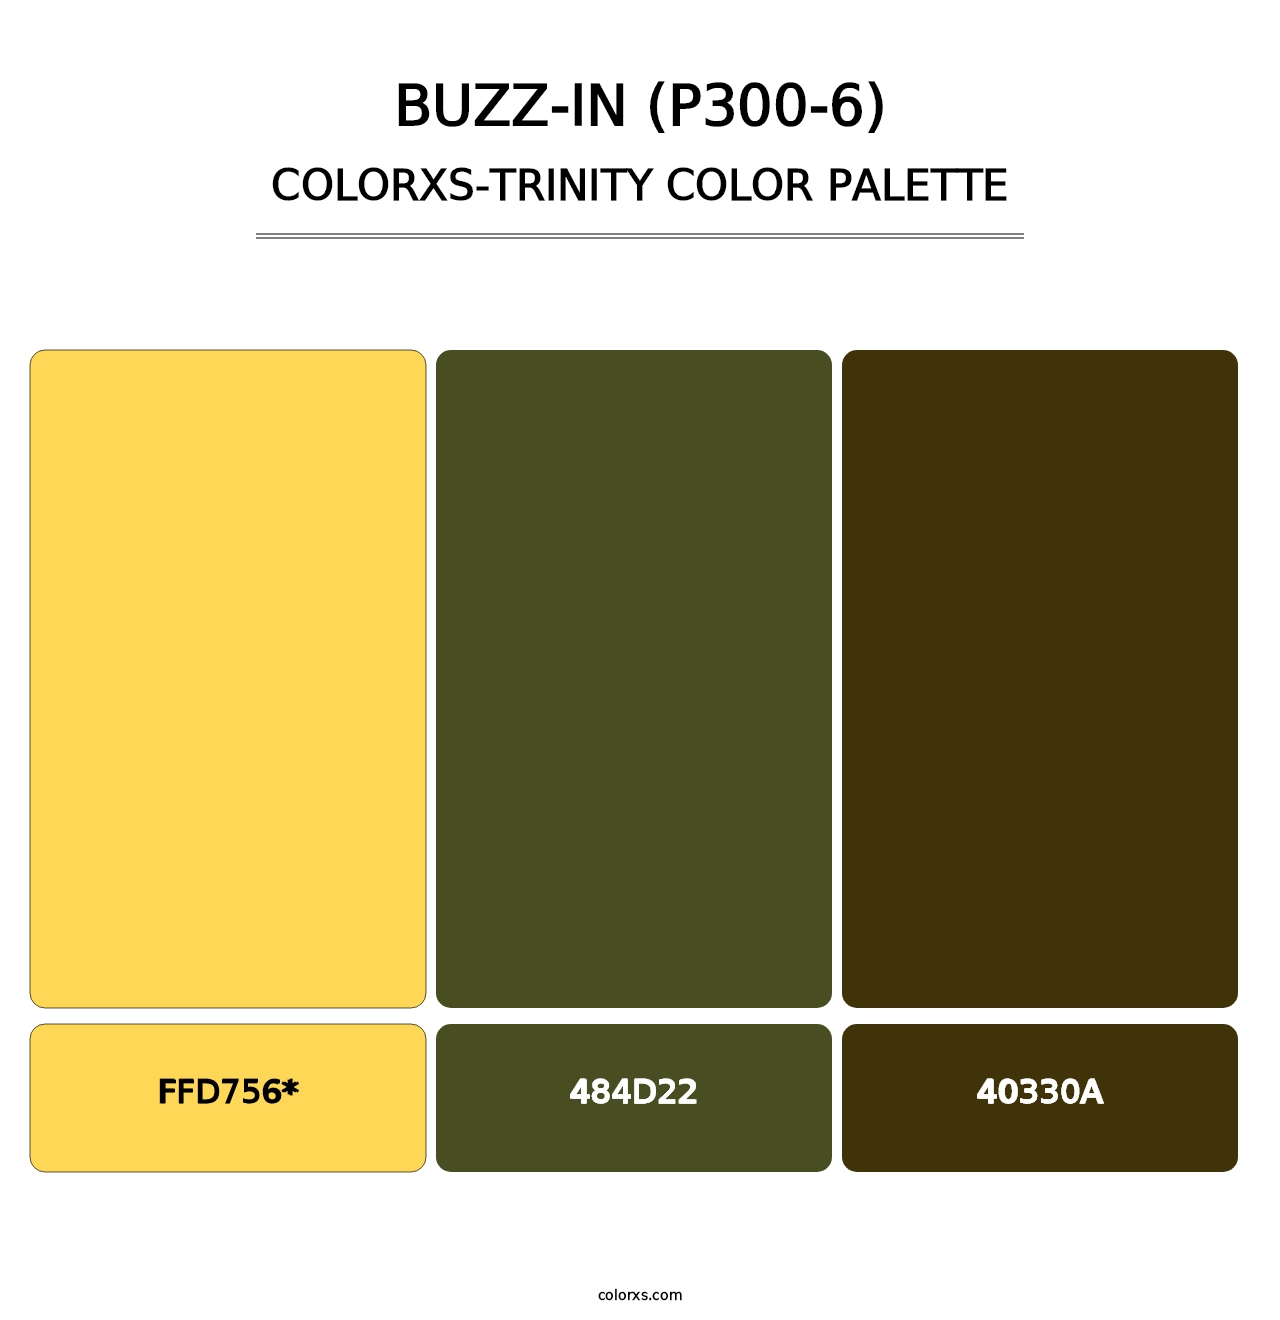 Buzz-In (P300-6) - Colorxs Trinity Palette